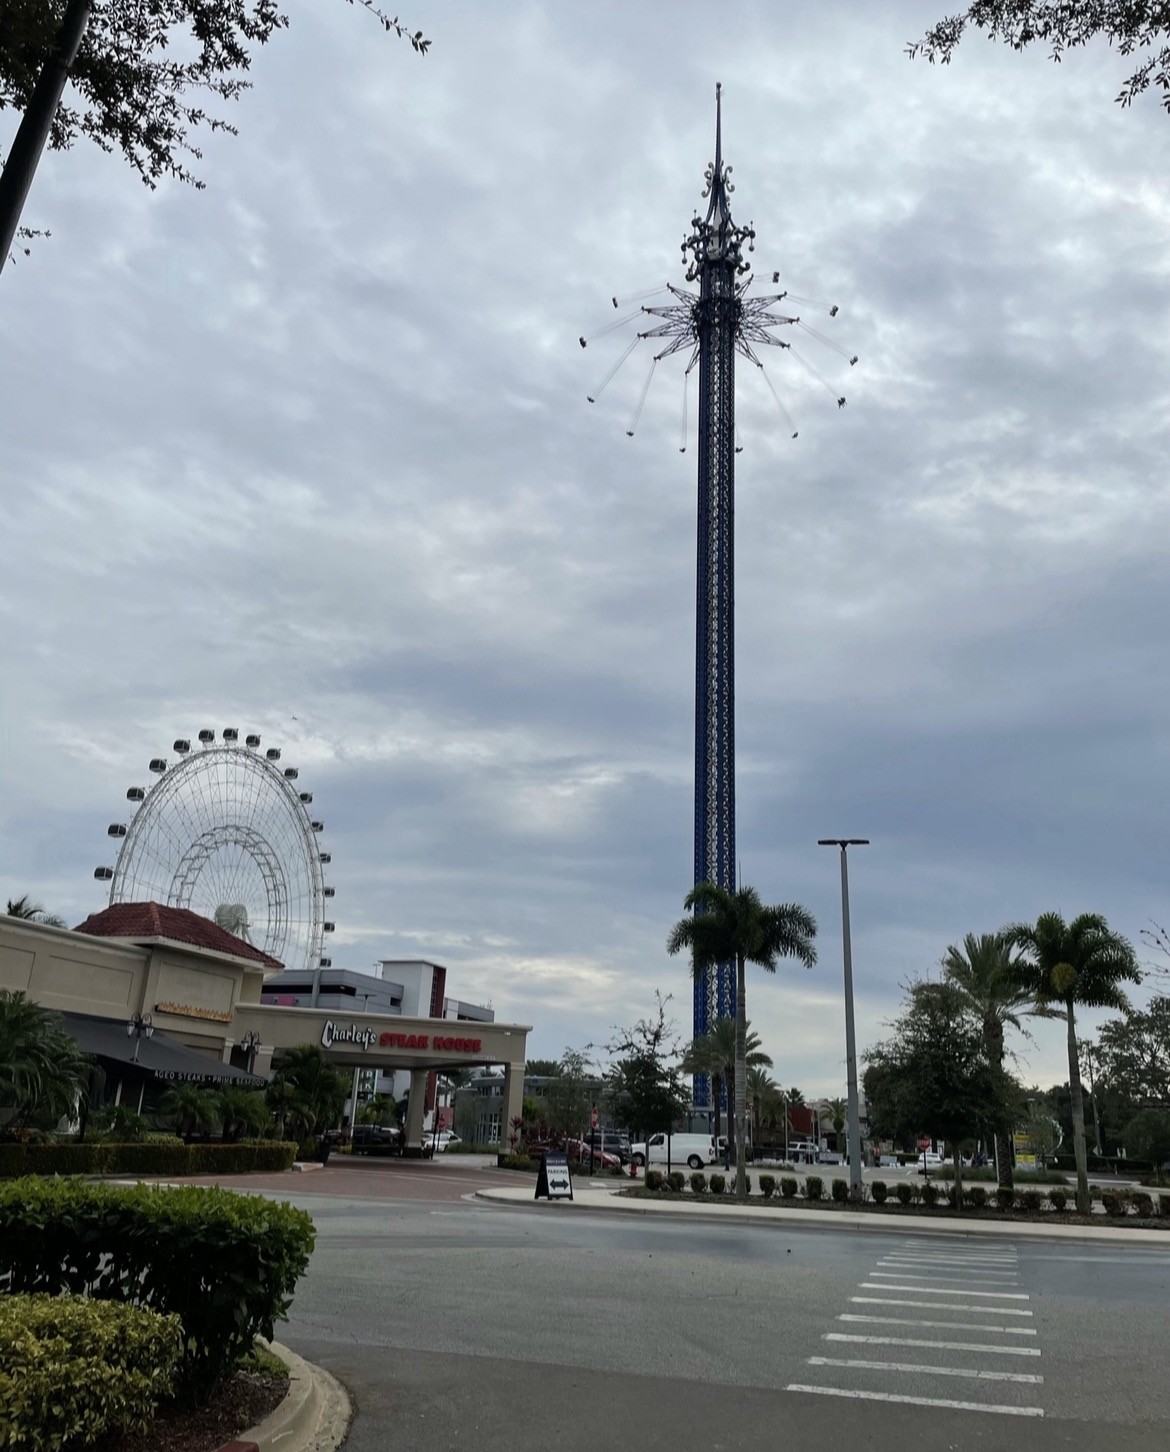 Orlando Starflyer is another one of the most popular attractions at Icon Park!